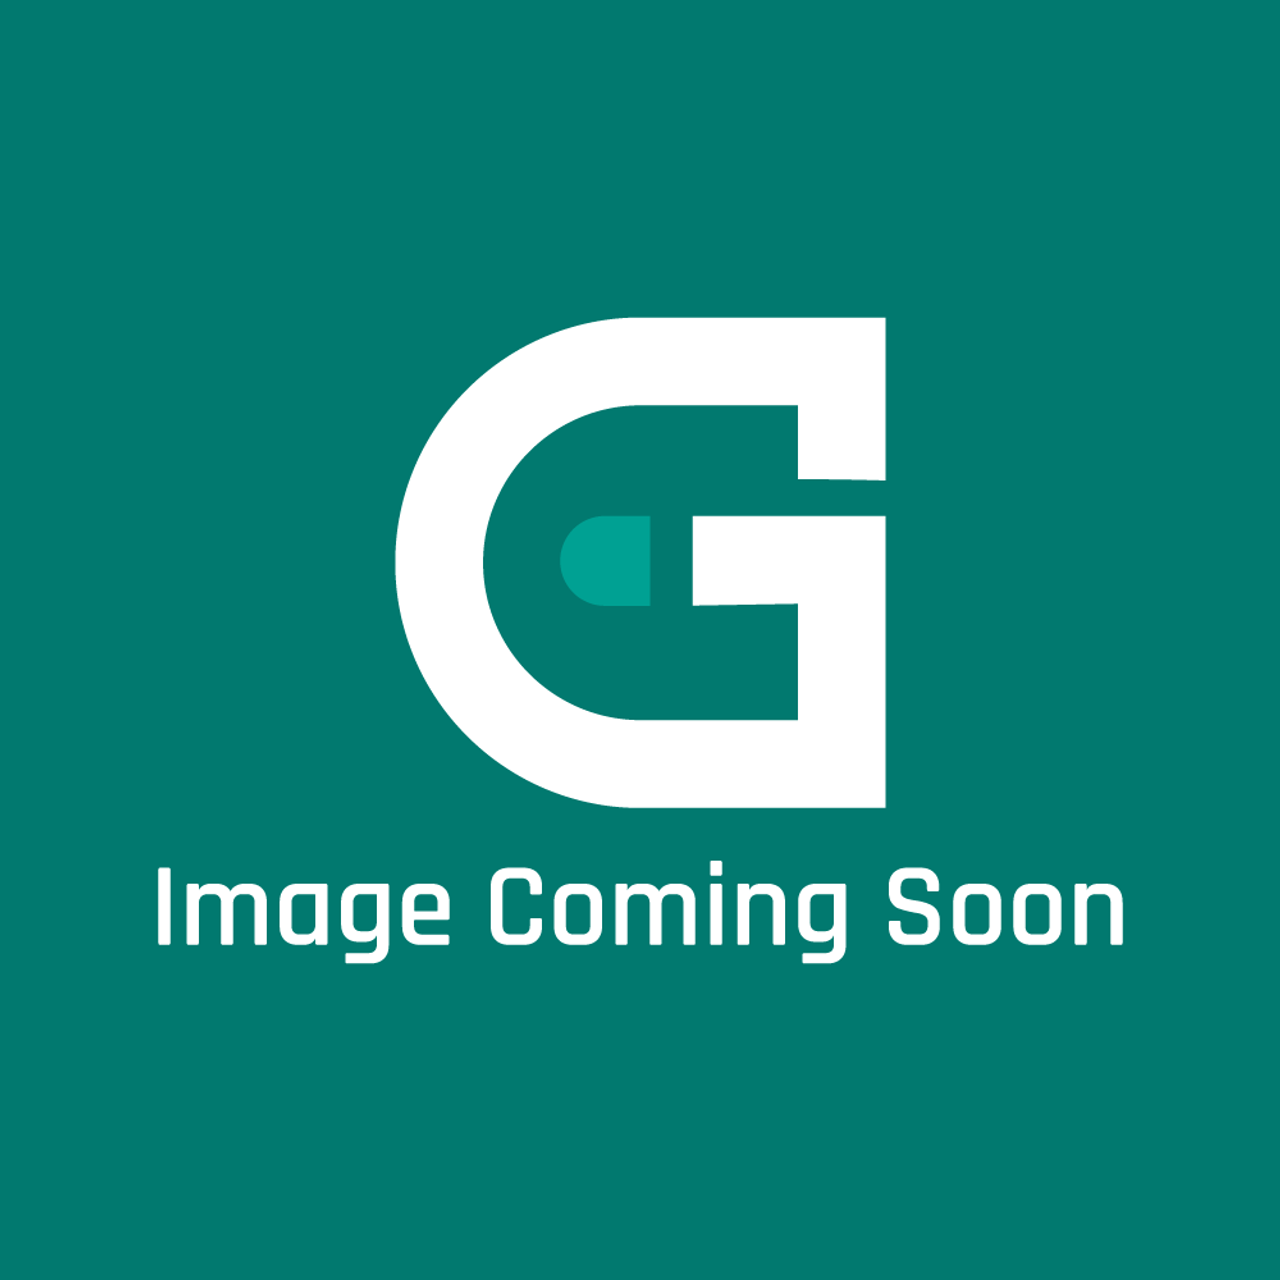 AGA Marvel A065577 - Side Panel Assembly-48/Lh/Ind - Image Coming Soon!